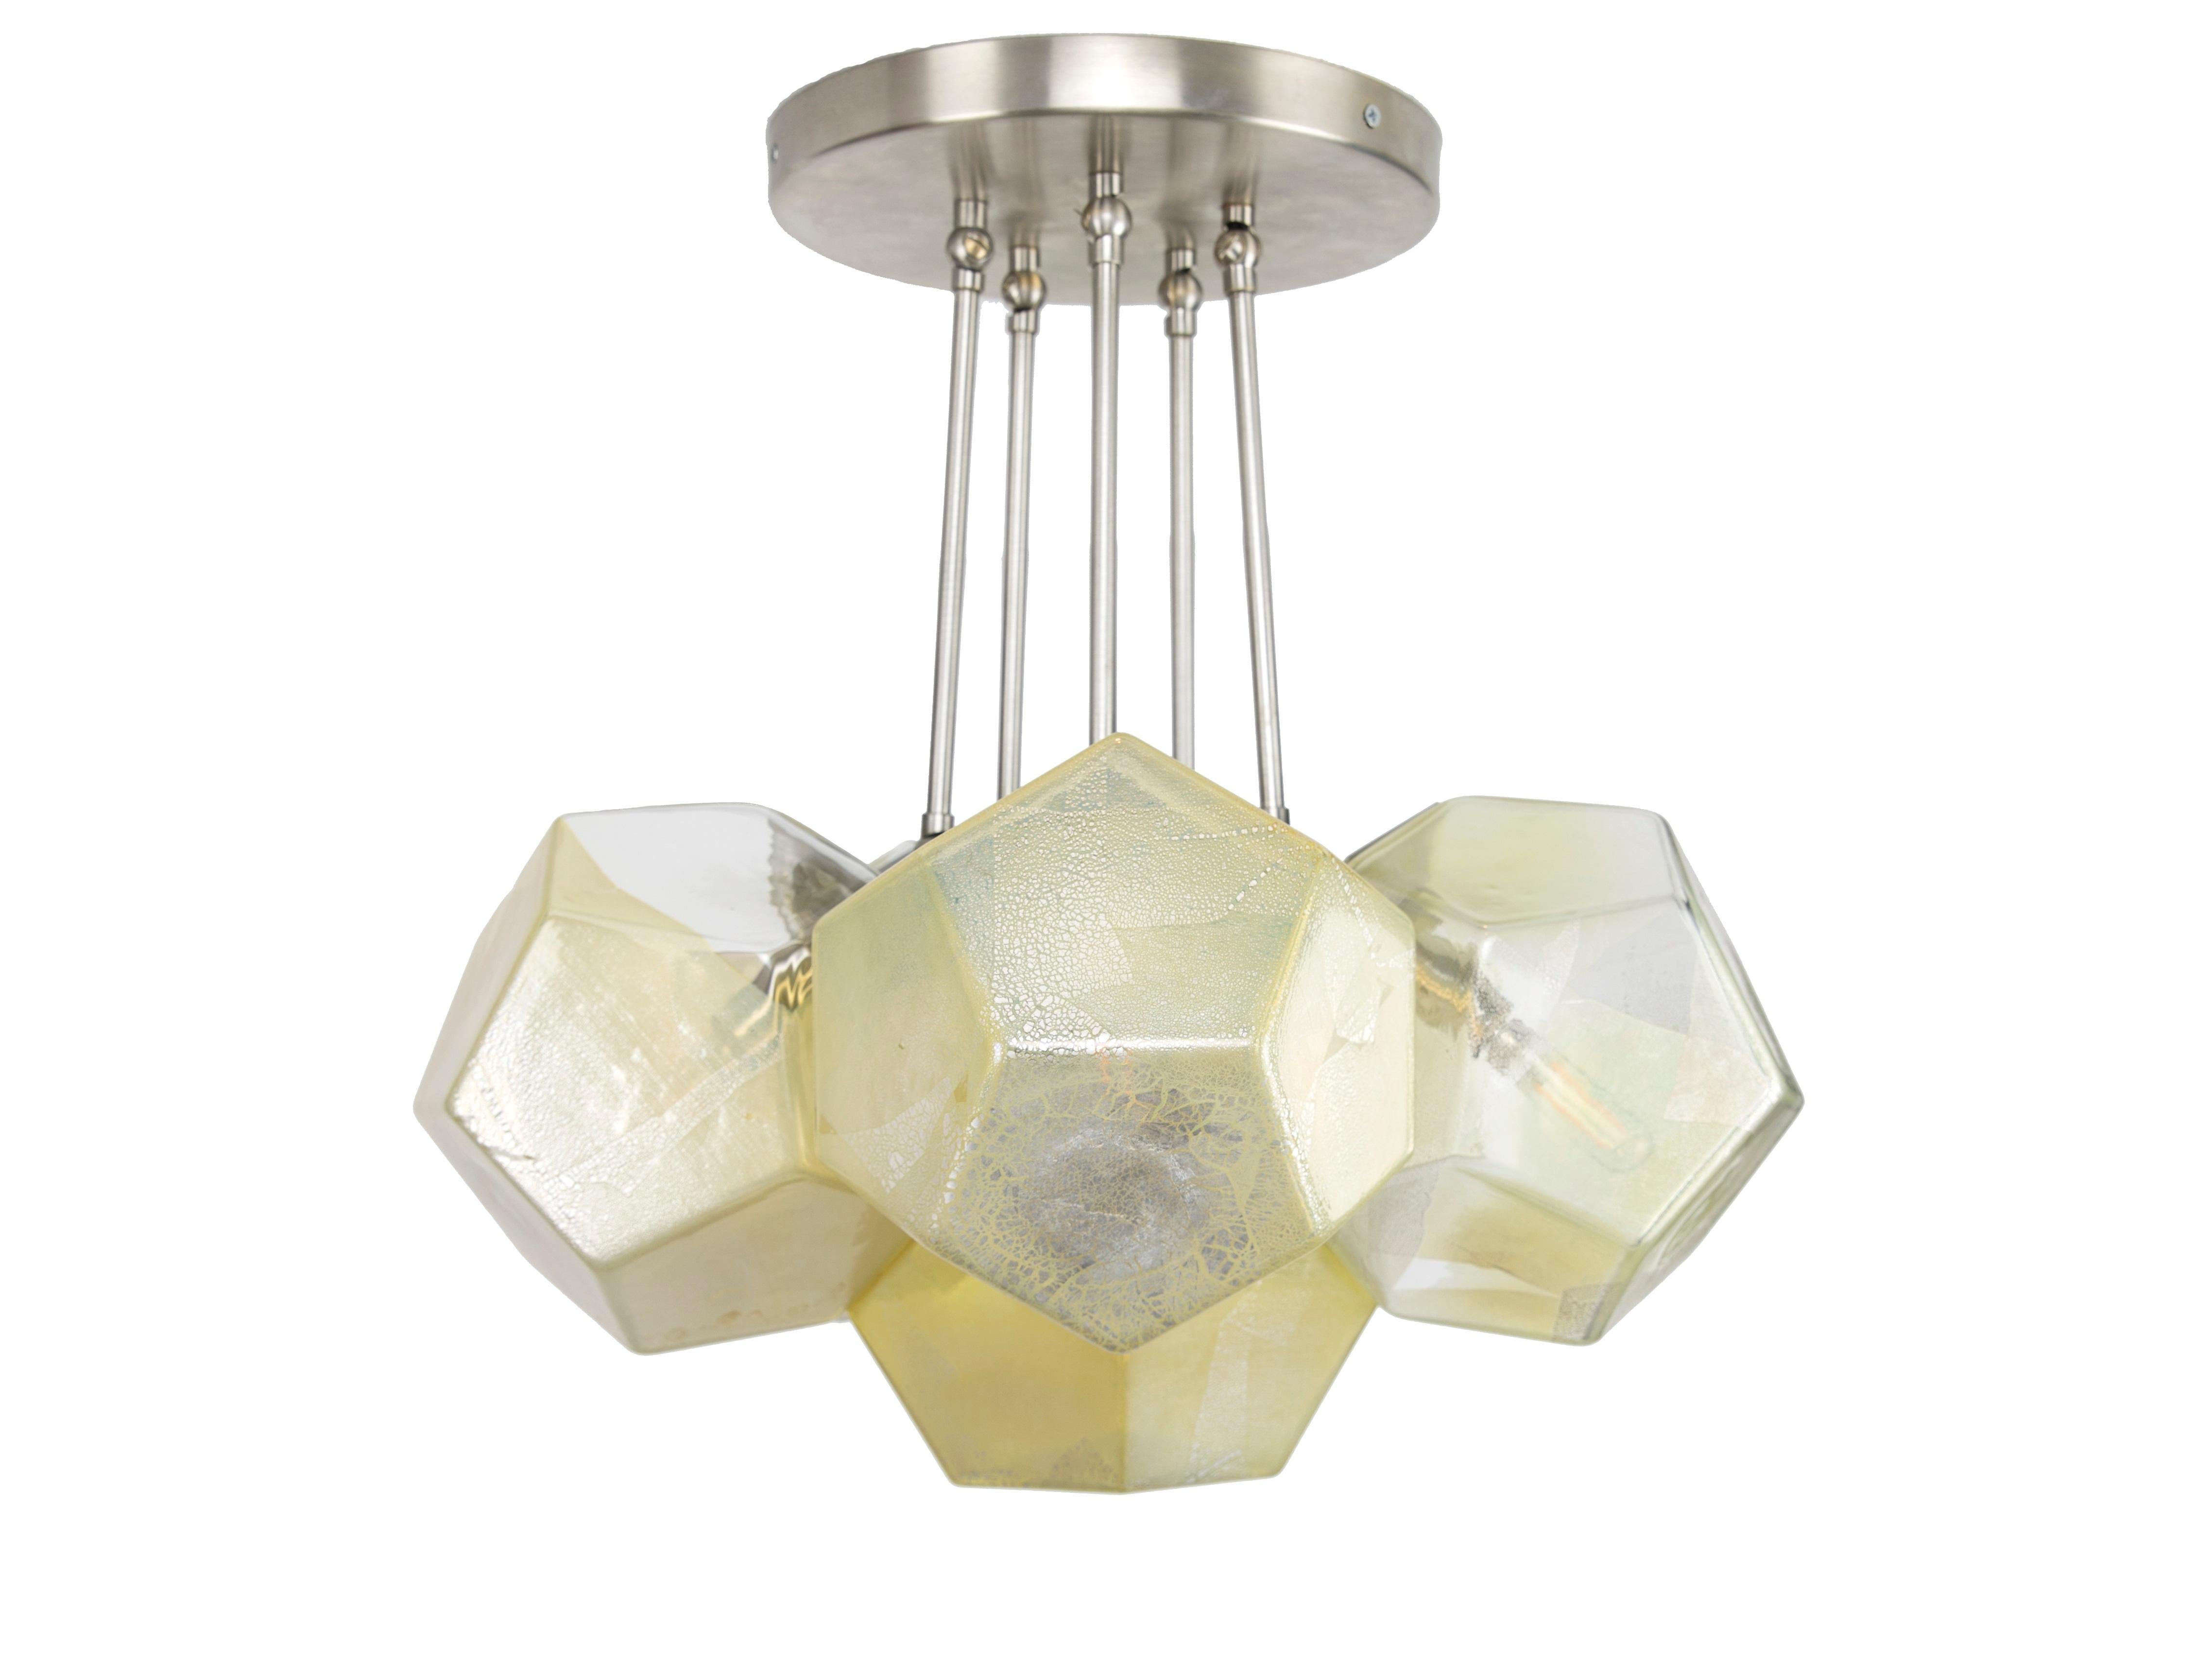 Hedron Series Chandelier in Silver Leaf, Handmade Contemporary Glass Lighting